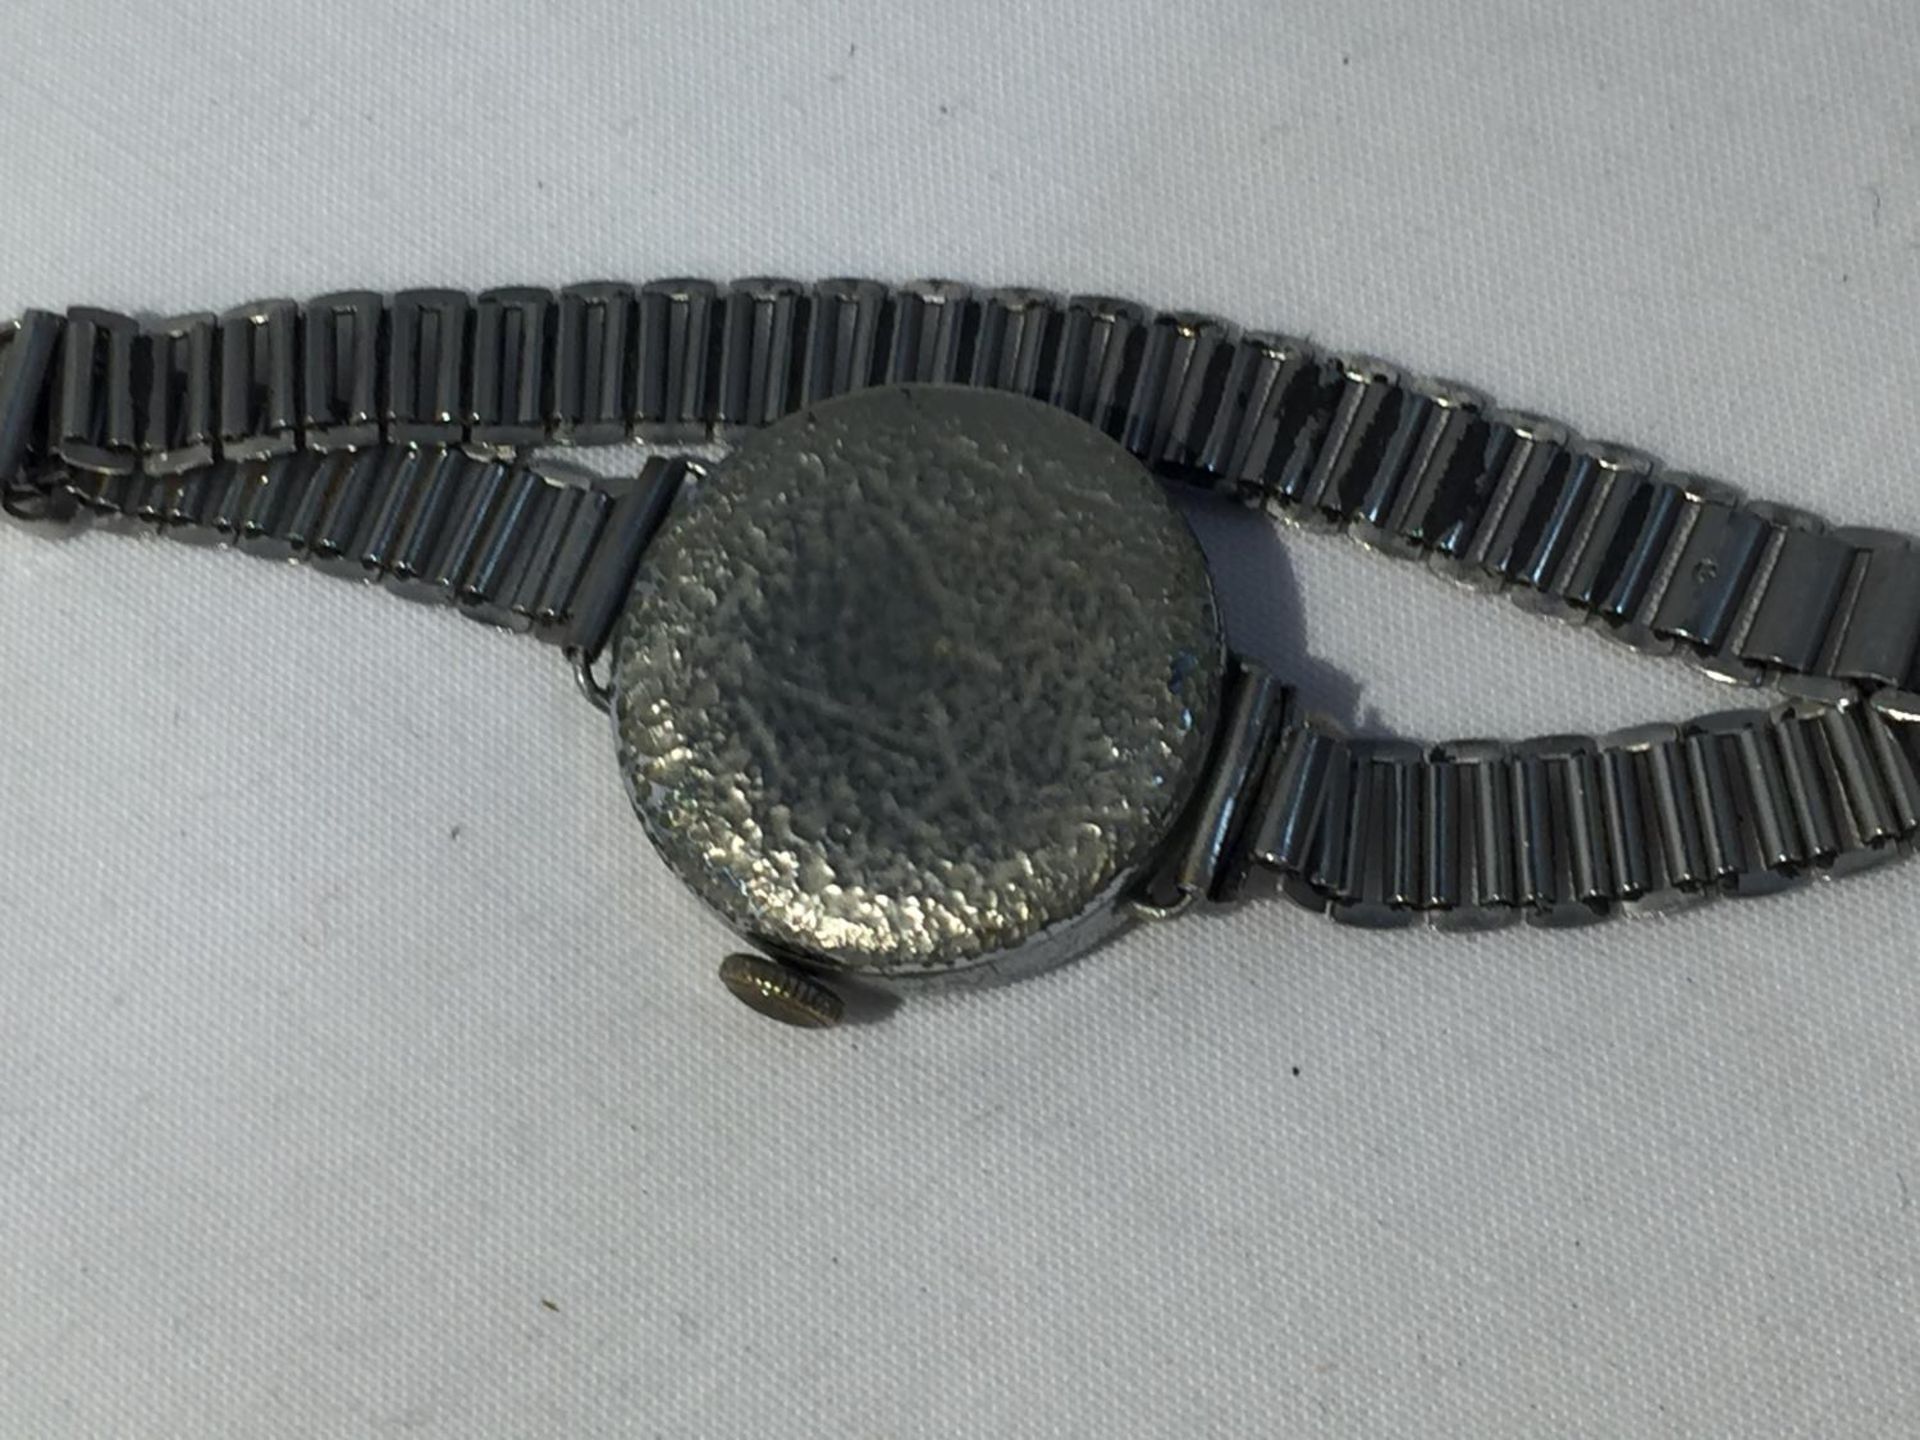 TWO WWI TRENCH WATCHES SEEN WORKING BUT NO WARRANTY - Image 8 of 8